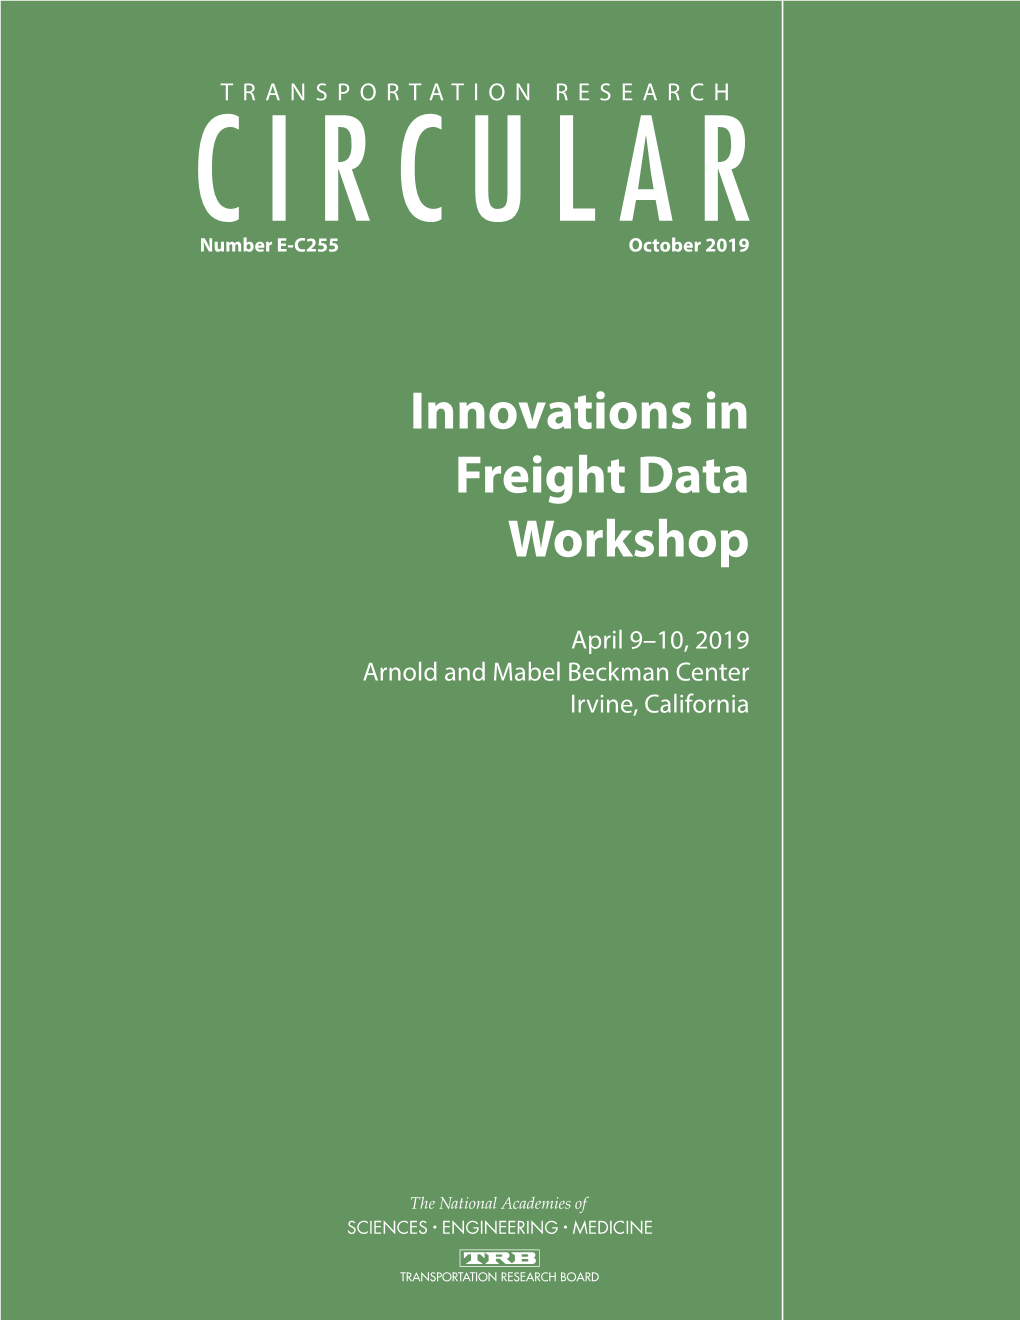 Innovations in Freight Data Workshop